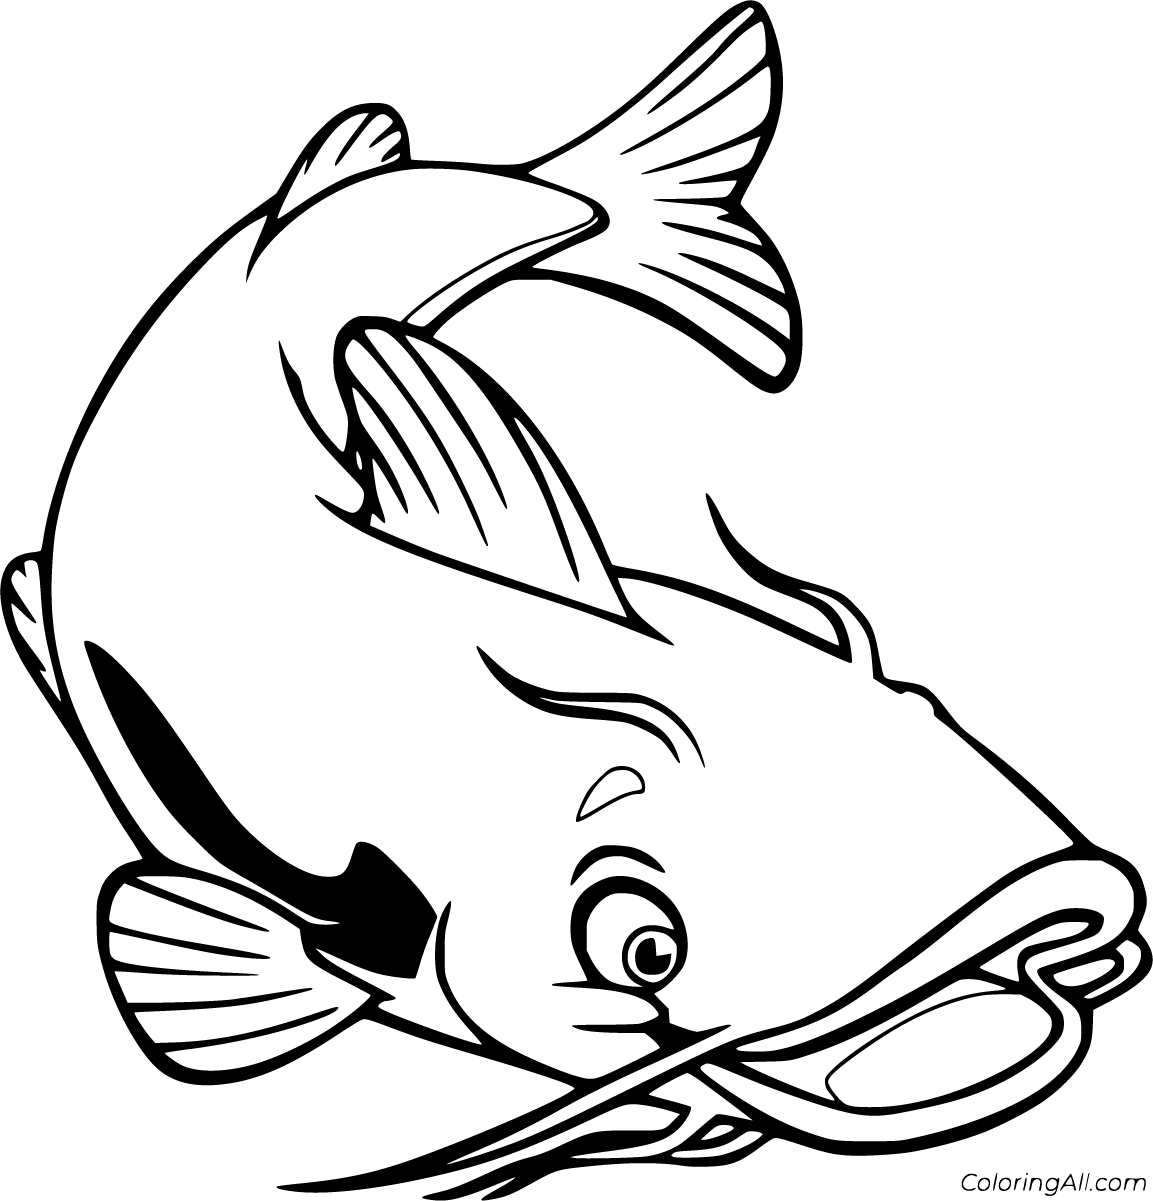 Catfish Coloring Pages - ColoringAll